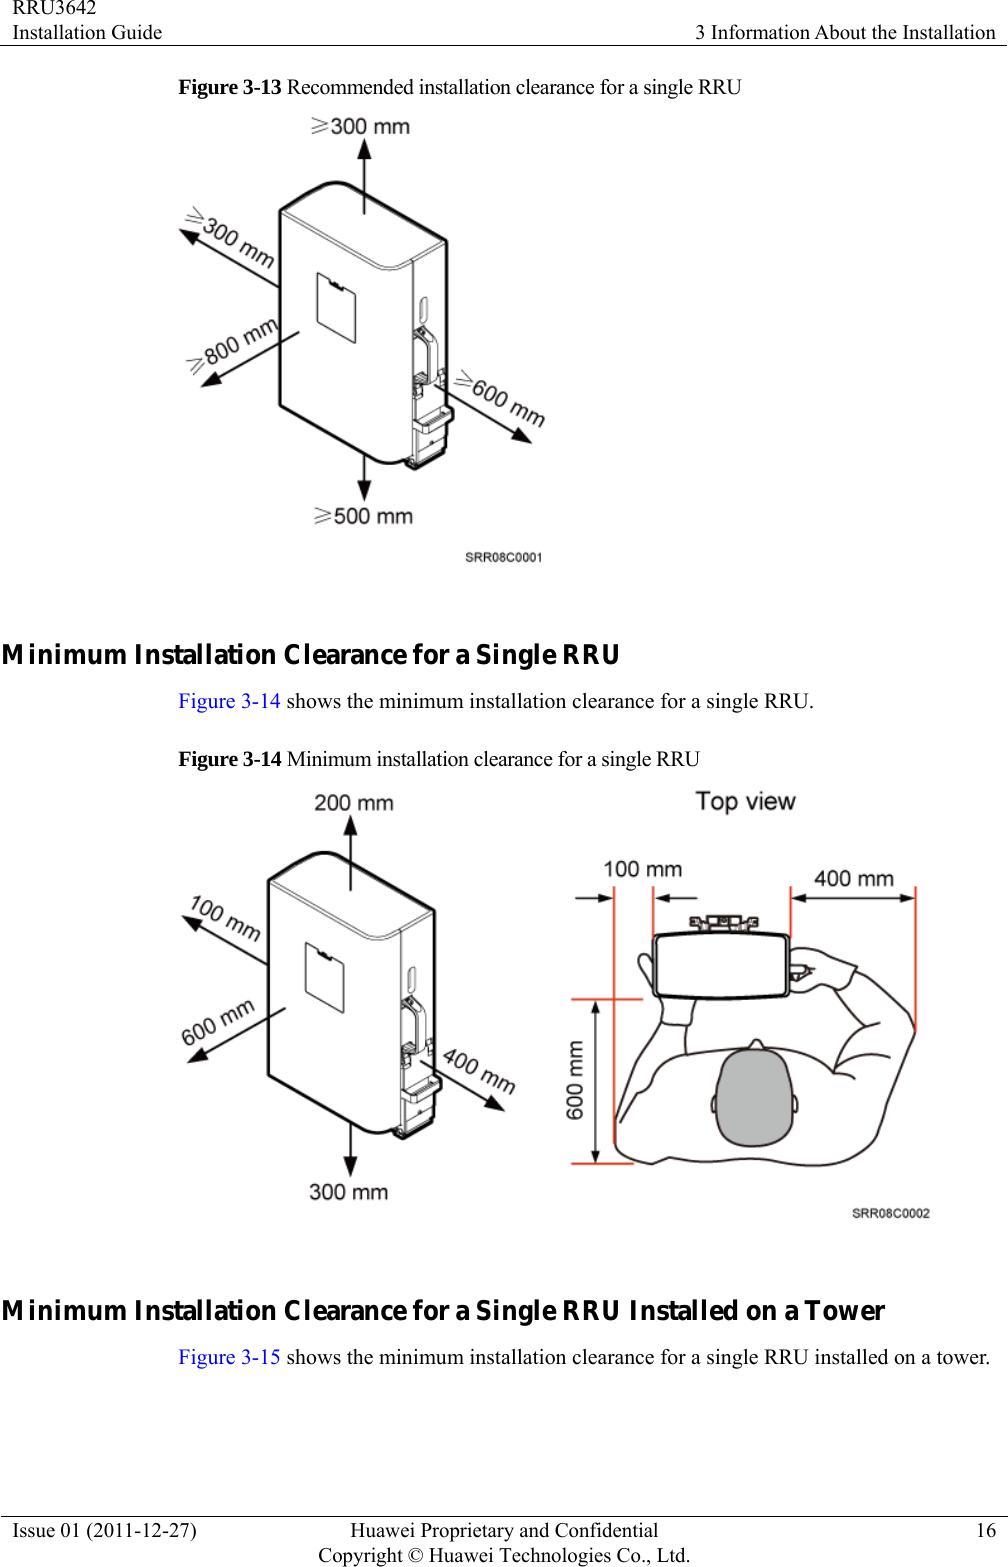 RRU3642 Installation Guide  3 Information About the Installation Issue 01 (2011-12-27)  Huawei Proprietary and Confidential         Copyright © Huawei Technologies Co., Ltd.16 Figure 3-13 Recommended installation clearance for a single RRU   Minimum Installation Clearance for a Single RRU Figure 3-14 shows the minimum installation clearance for a single RRU. Figure 3-14 Minimum installation clearance for a single RRU   Minimum Installation Clearance for a Single RRU Installed on a Tower Figure 3-15 shows the minimum installation clearance for a single RRU installed on a tower. 